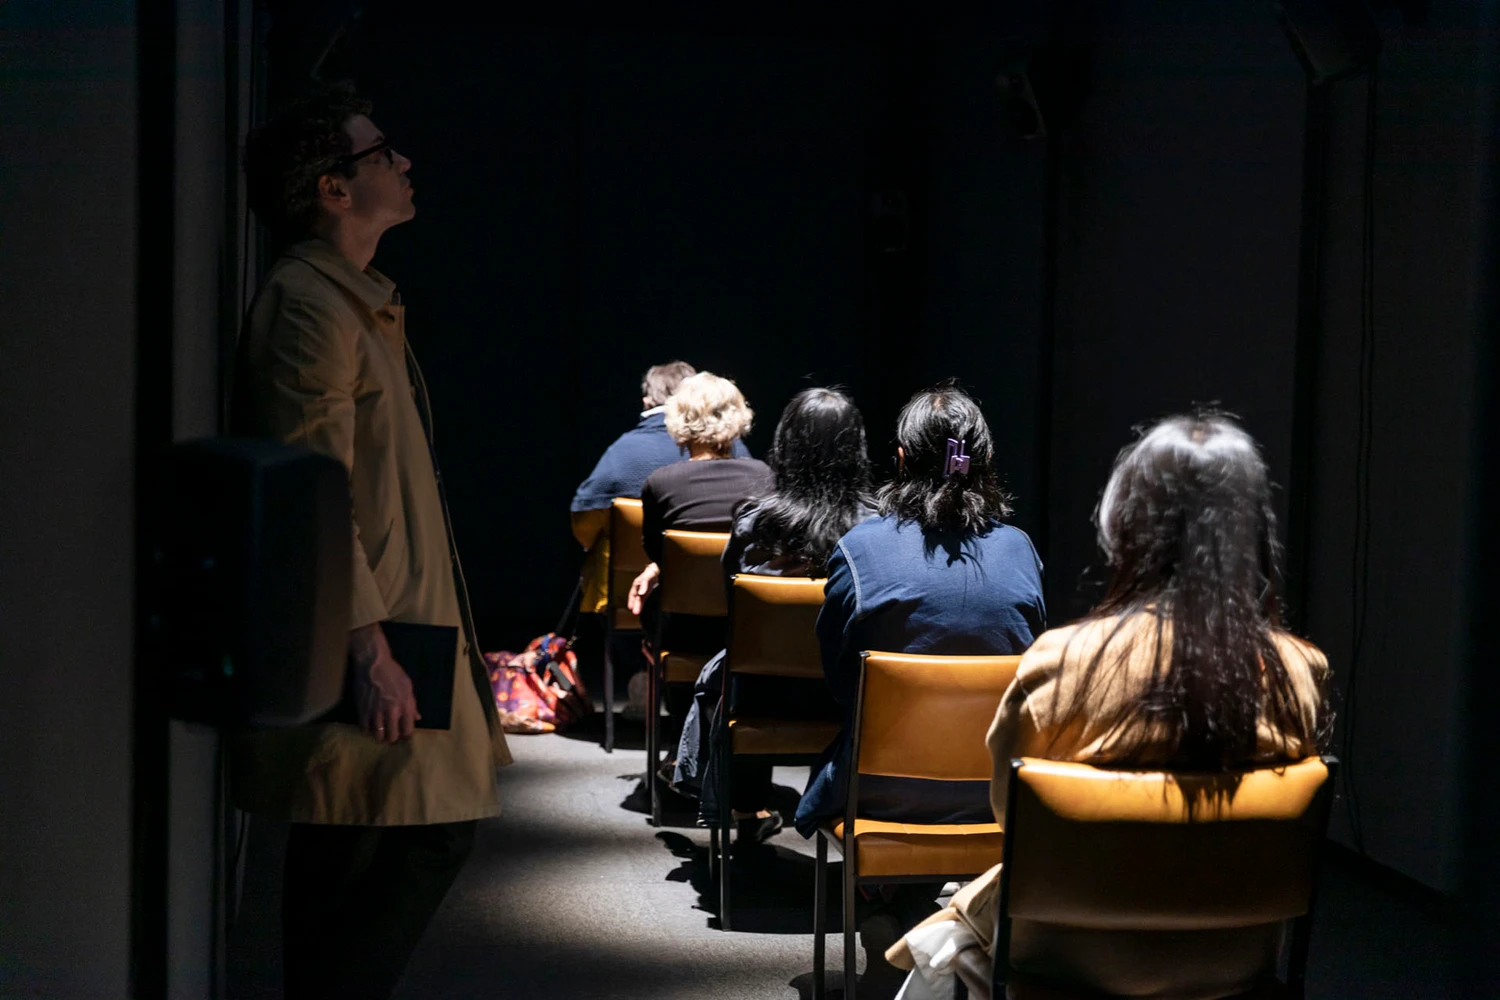 Five people sit single file in a line of padded yellow chairs, facing away into the darkness of a narrow room. The back of their heads glow under overhead lights. One person stands to the side, outside of the row of light. They look up and into the shadows of the ceiling, as though listening attentively.